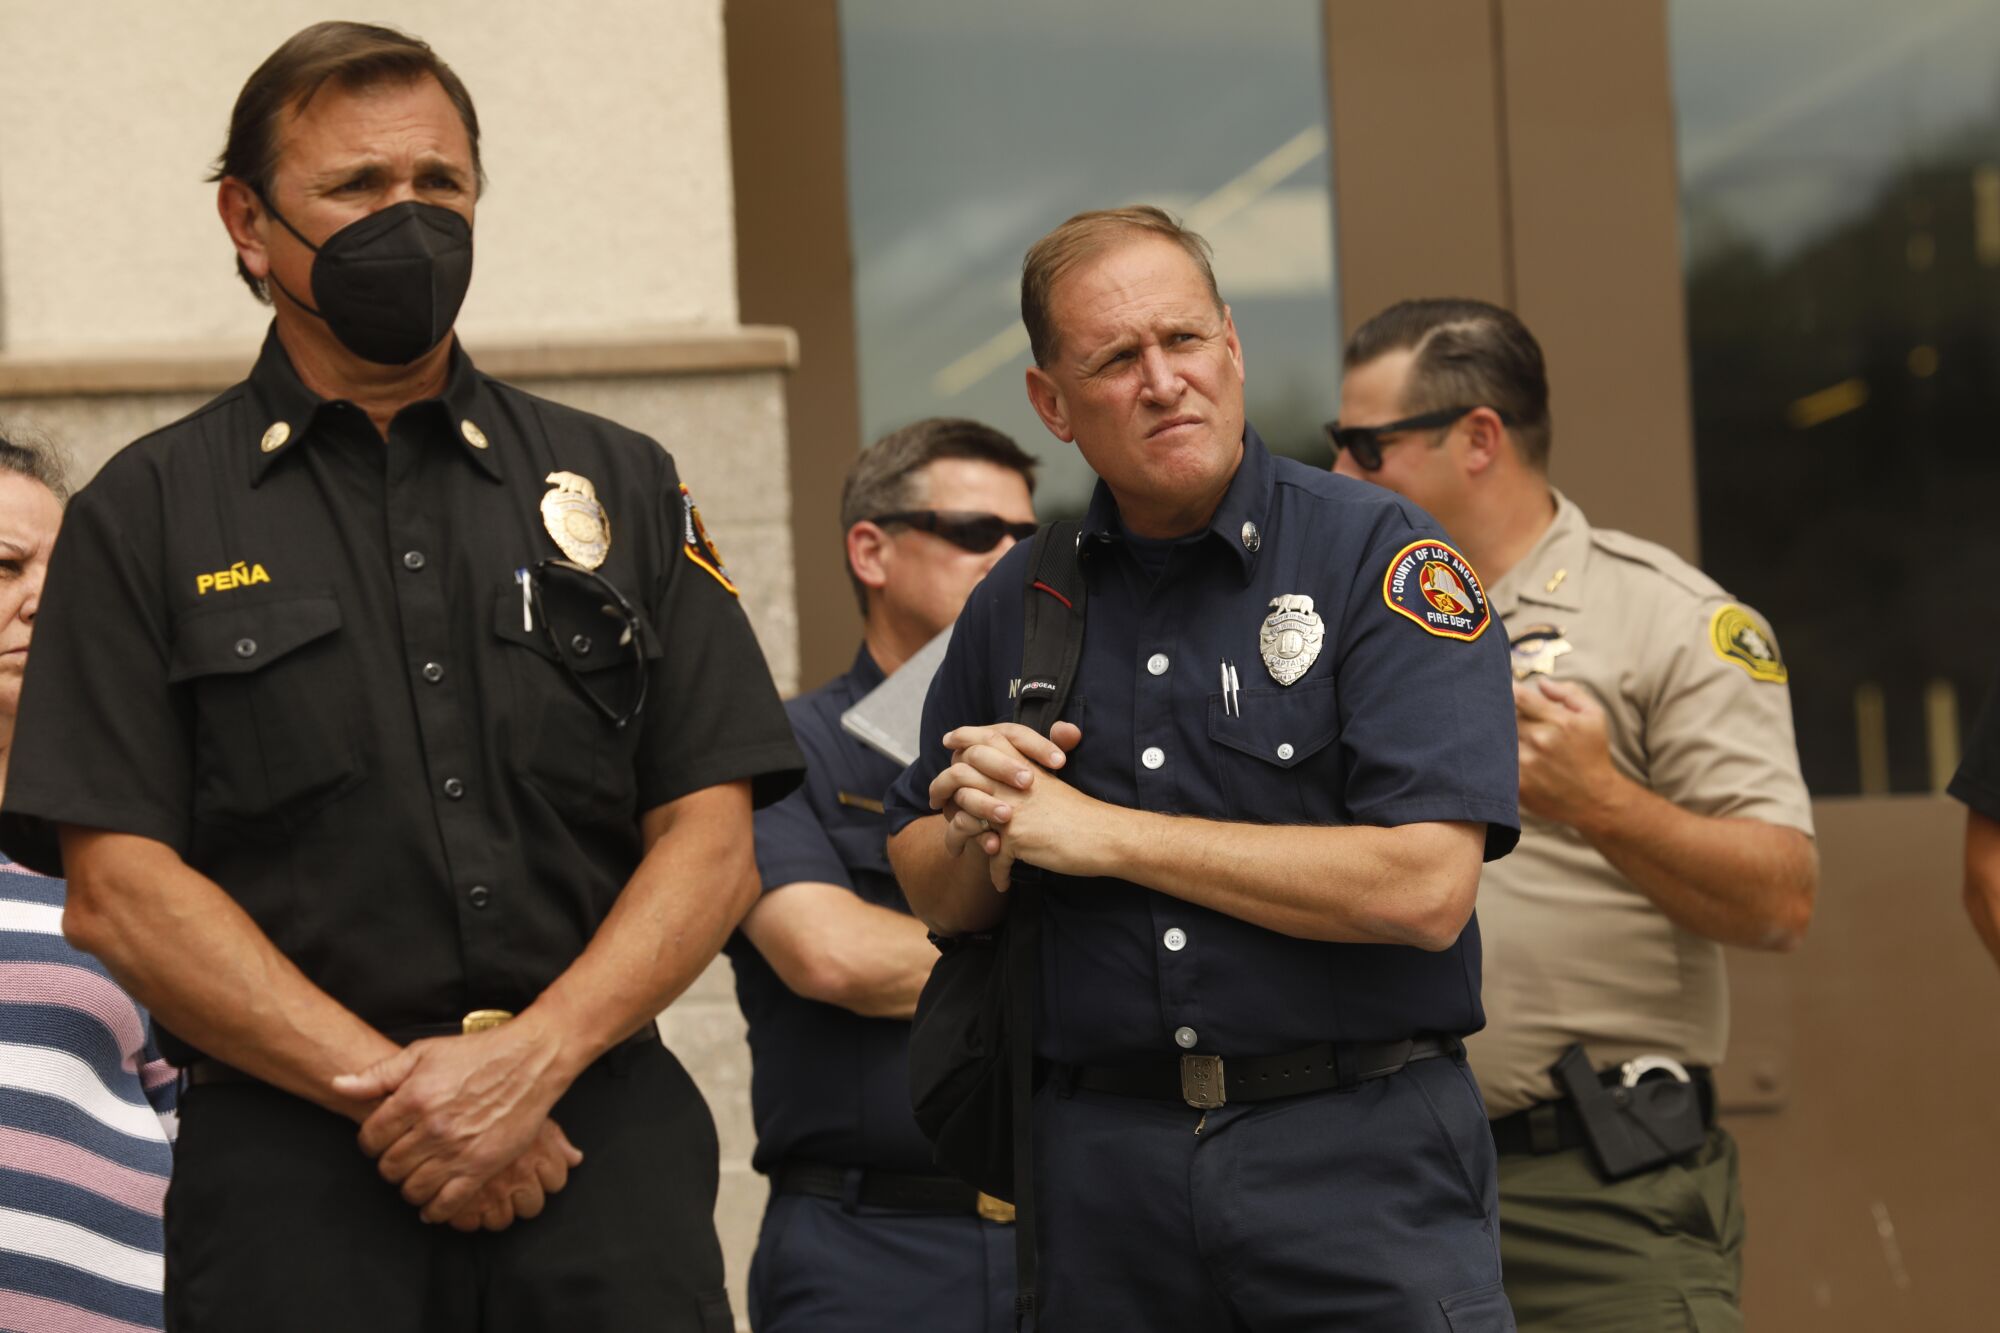 Two uniformed firefighters, one wearing a face mask, stare intently.